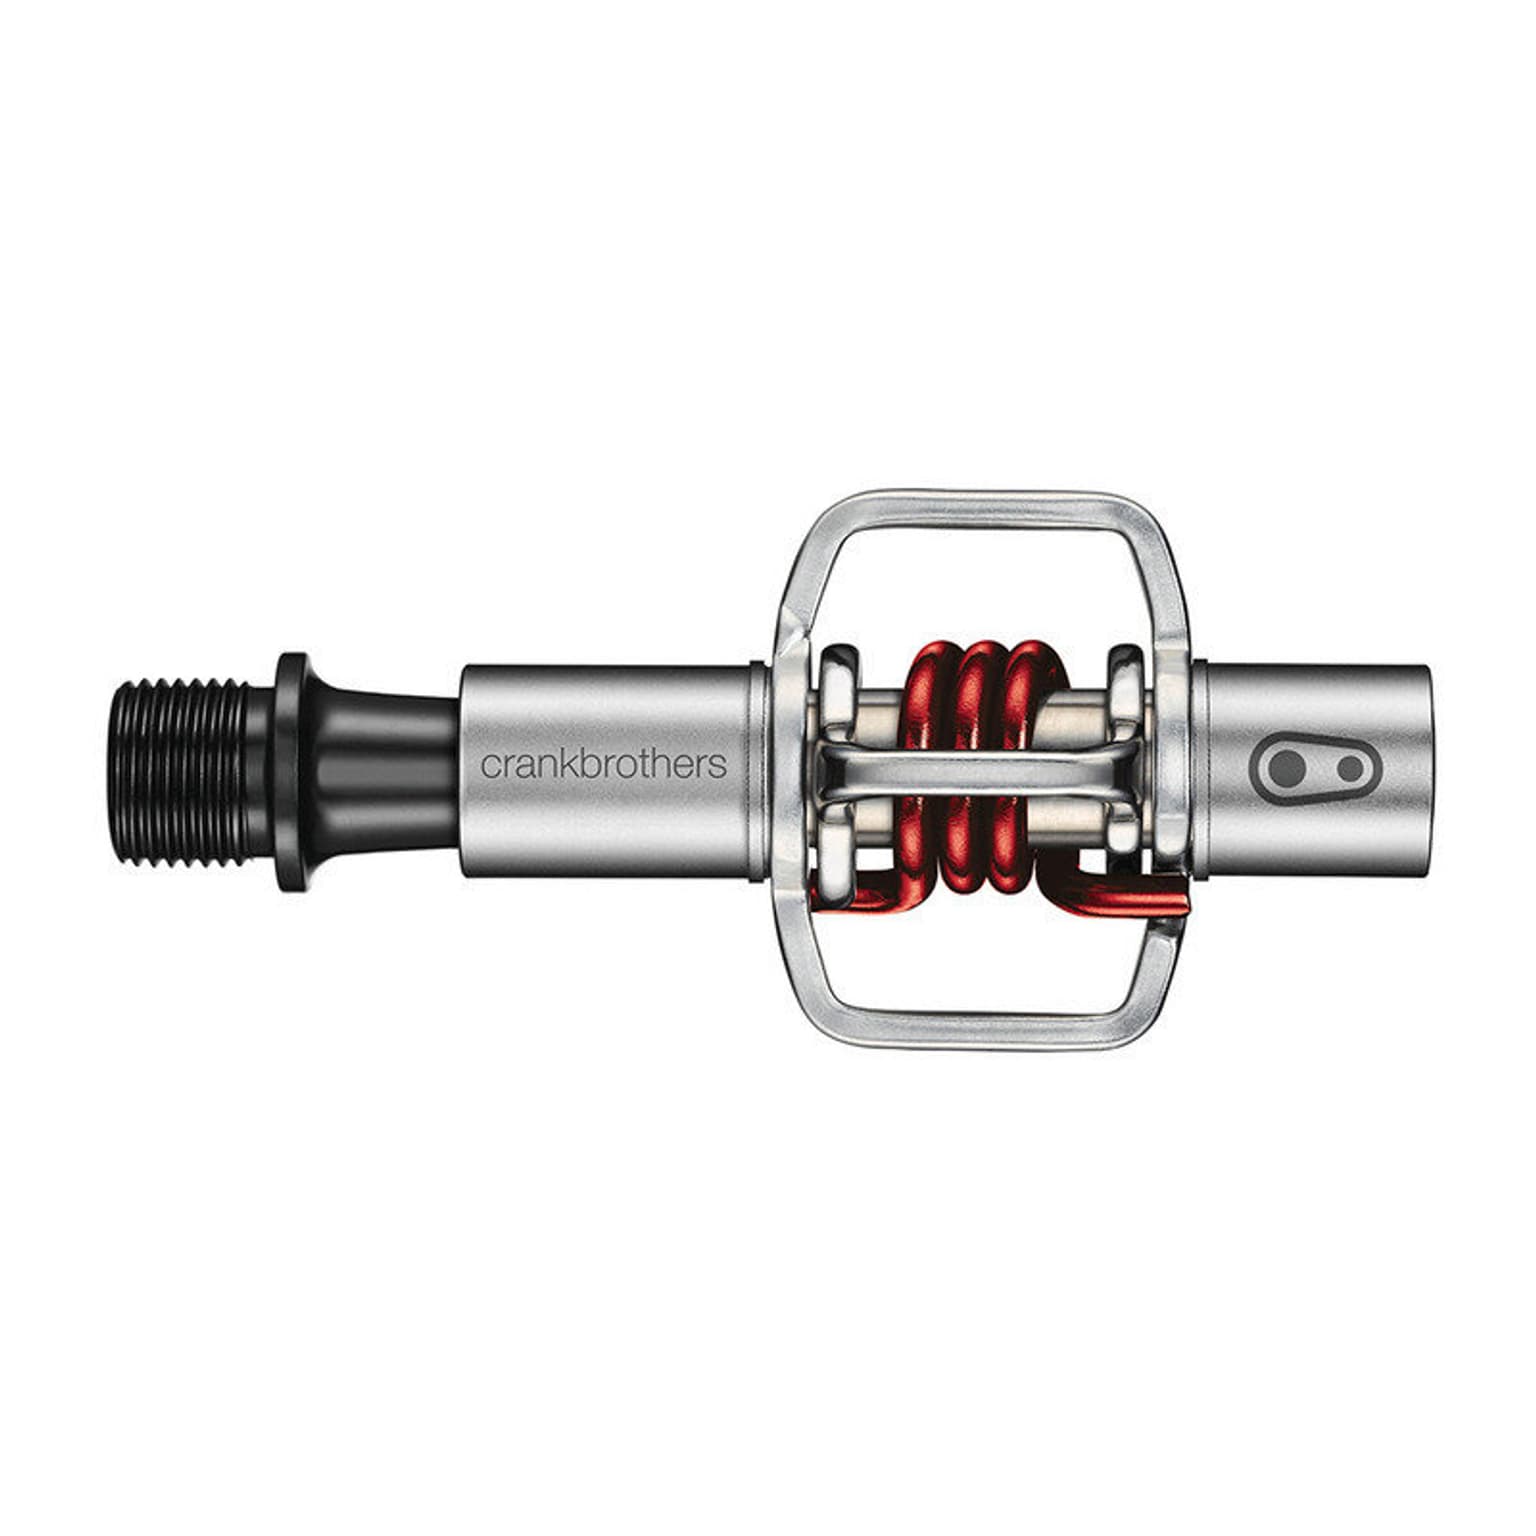 crankbrothers crankbrothers Pedal Egg Beater 1 Pedale 1